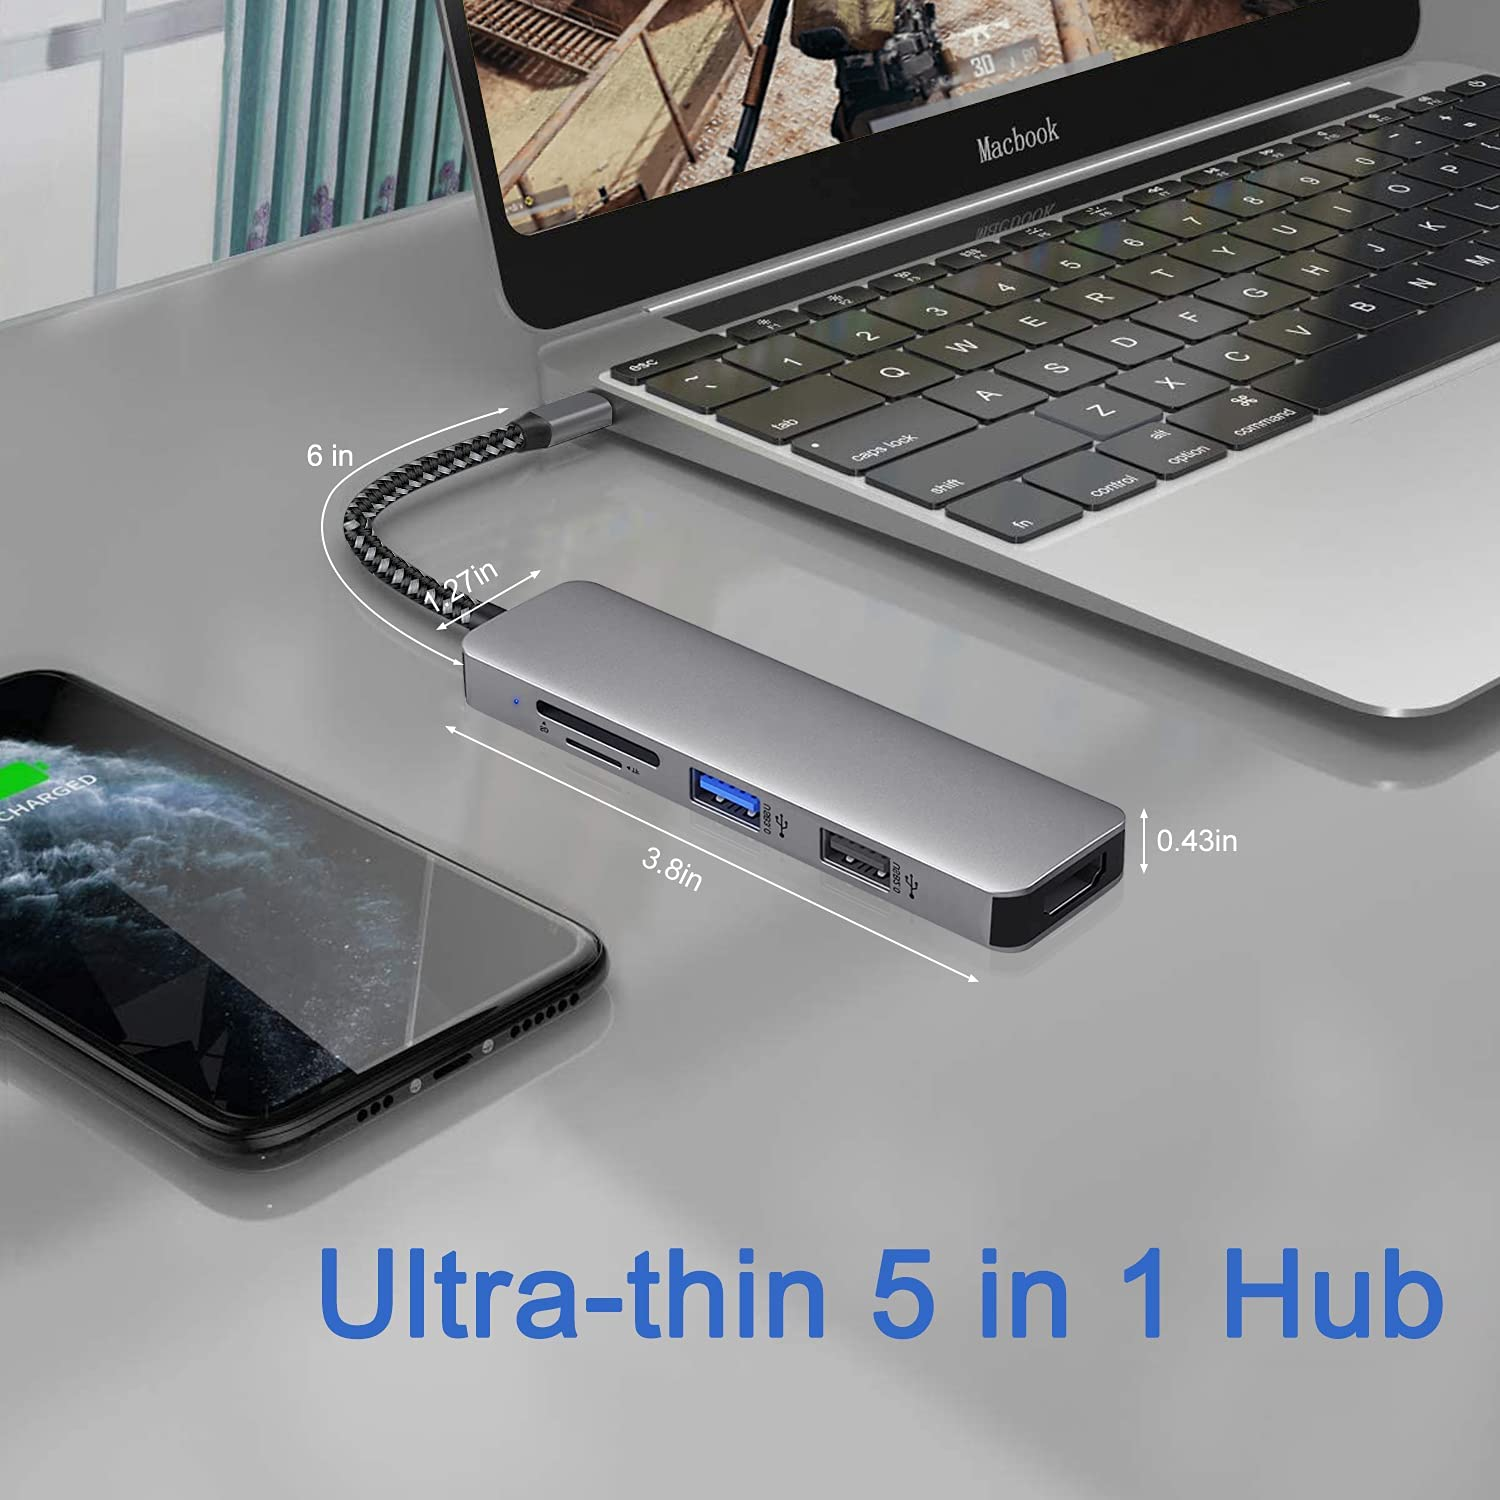 USB C Hub Multiport 5 in 1 USB C Adapter with 4K 30Hz HDMI Card Reader SD/TF Card Slots USB 3.0/2.0 for Macbook Pro/Air Ipad Pro XPS Type C and More